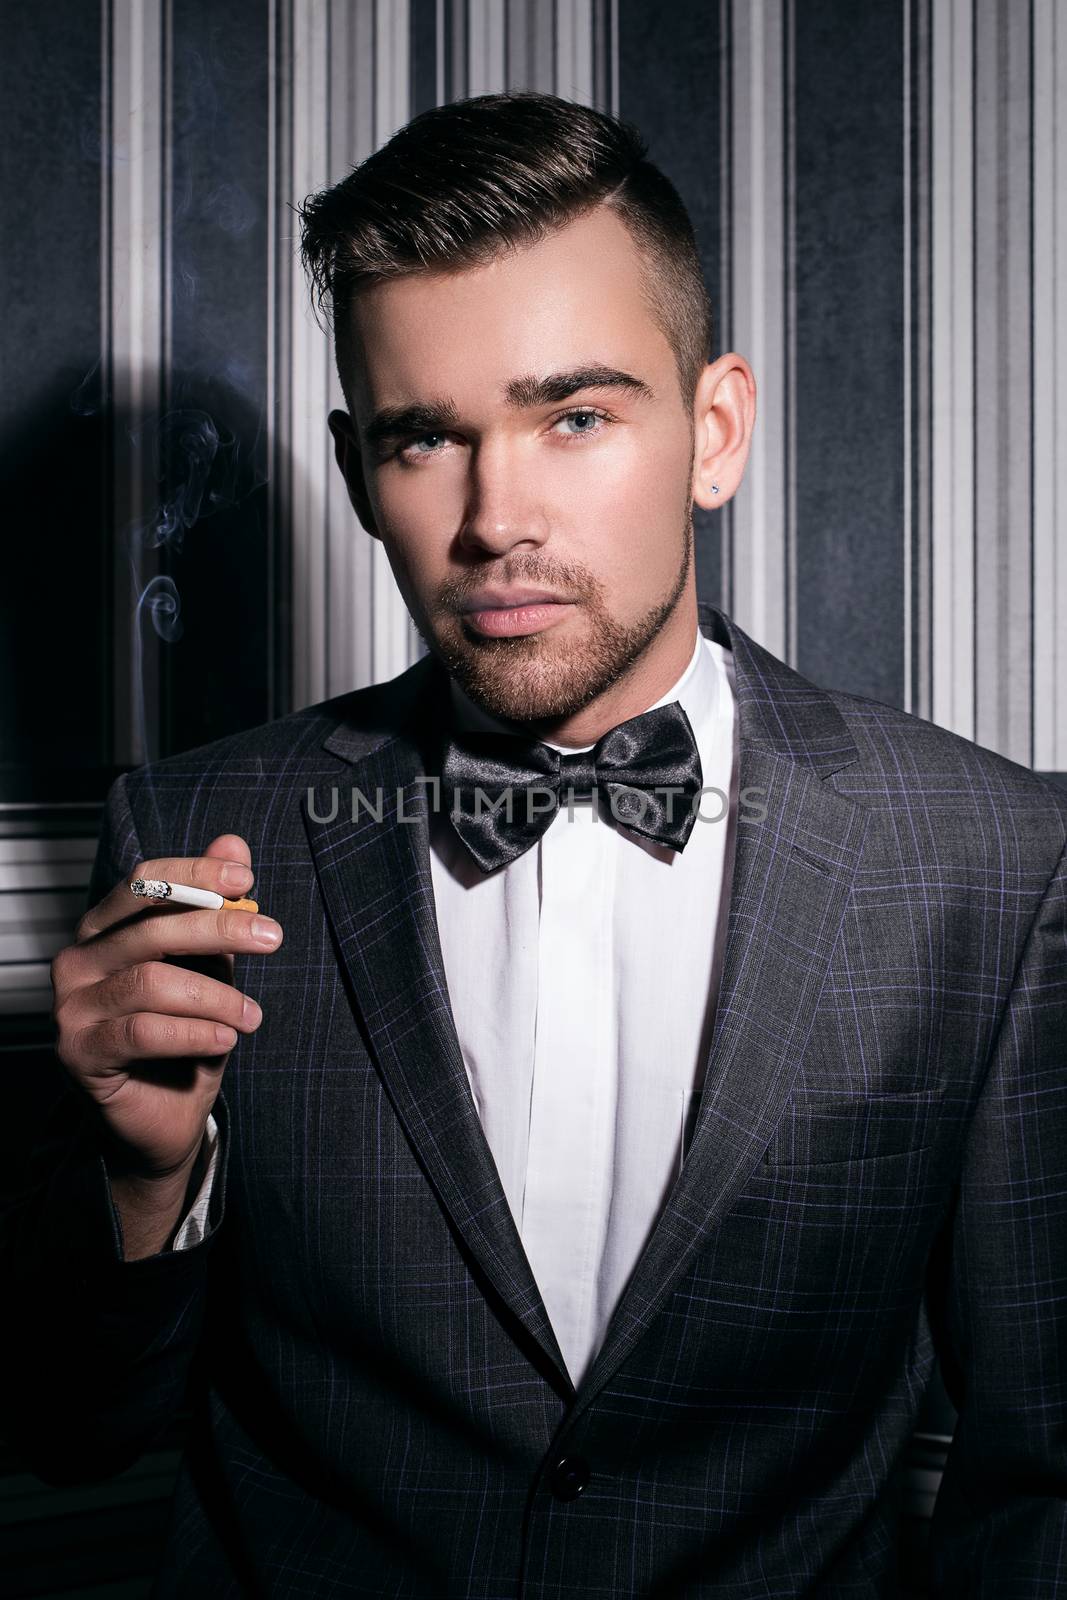 Portrait of a handsome man in a suit with a cigarette